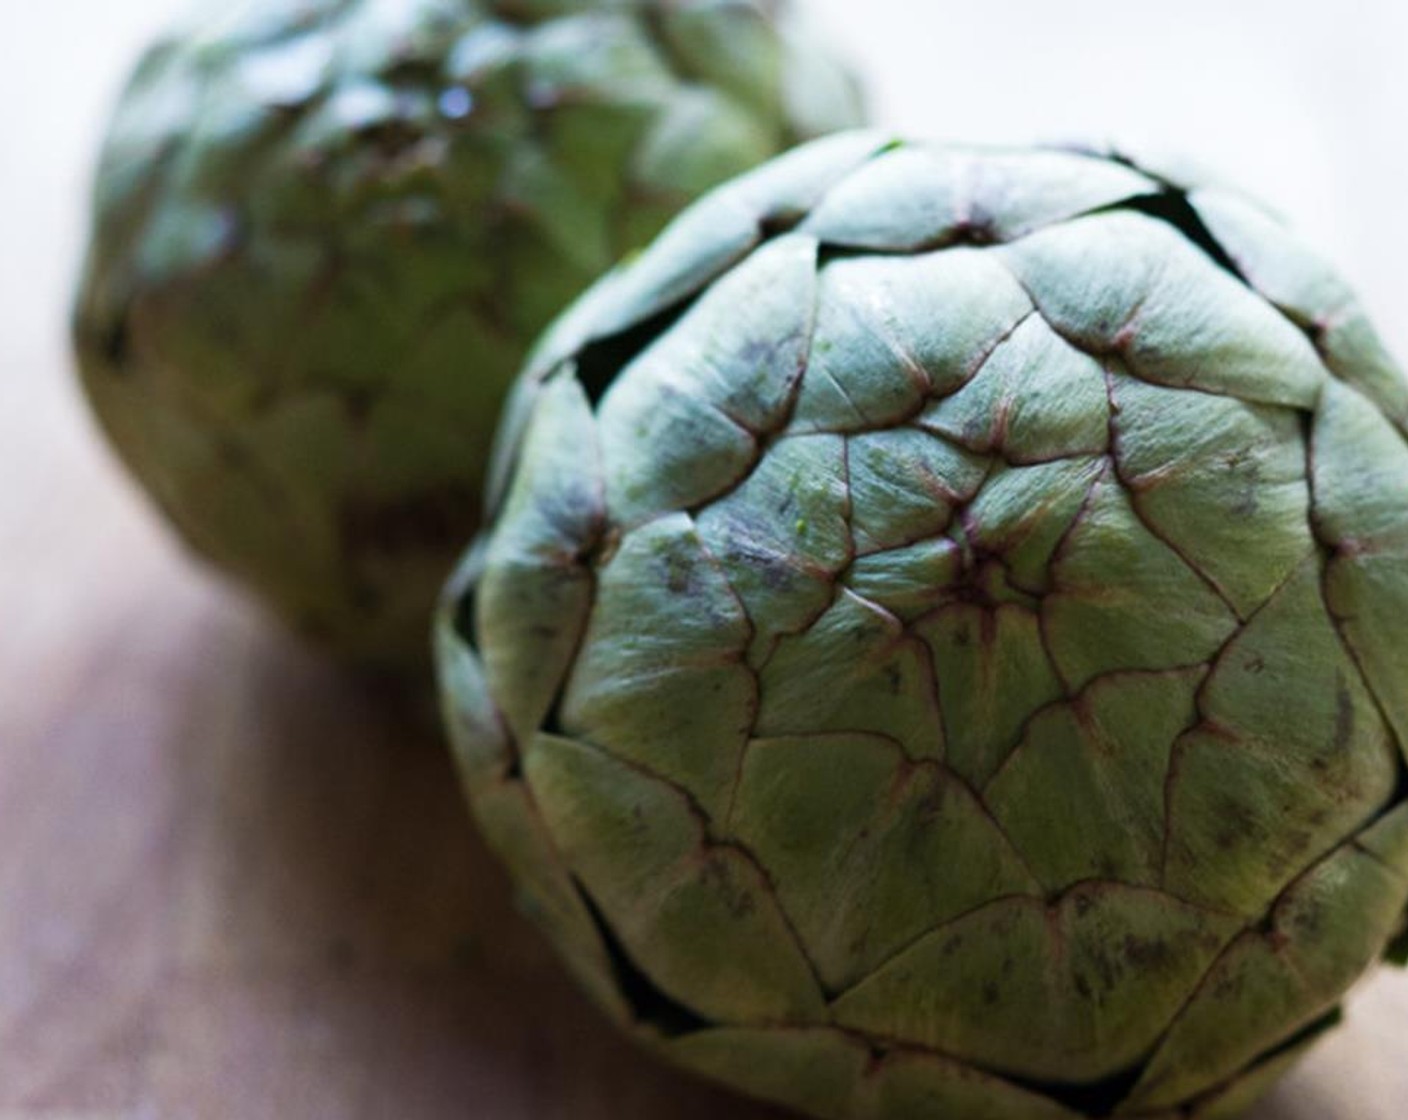 step 1 To blanch Artichokes (2), place them in a pot full of water. Add Salt (1 tablespoon) and juice of the Lemon (1) ( leave the lemon halves in the water). Bring to a boil, then simmer on low for 45 minutes.